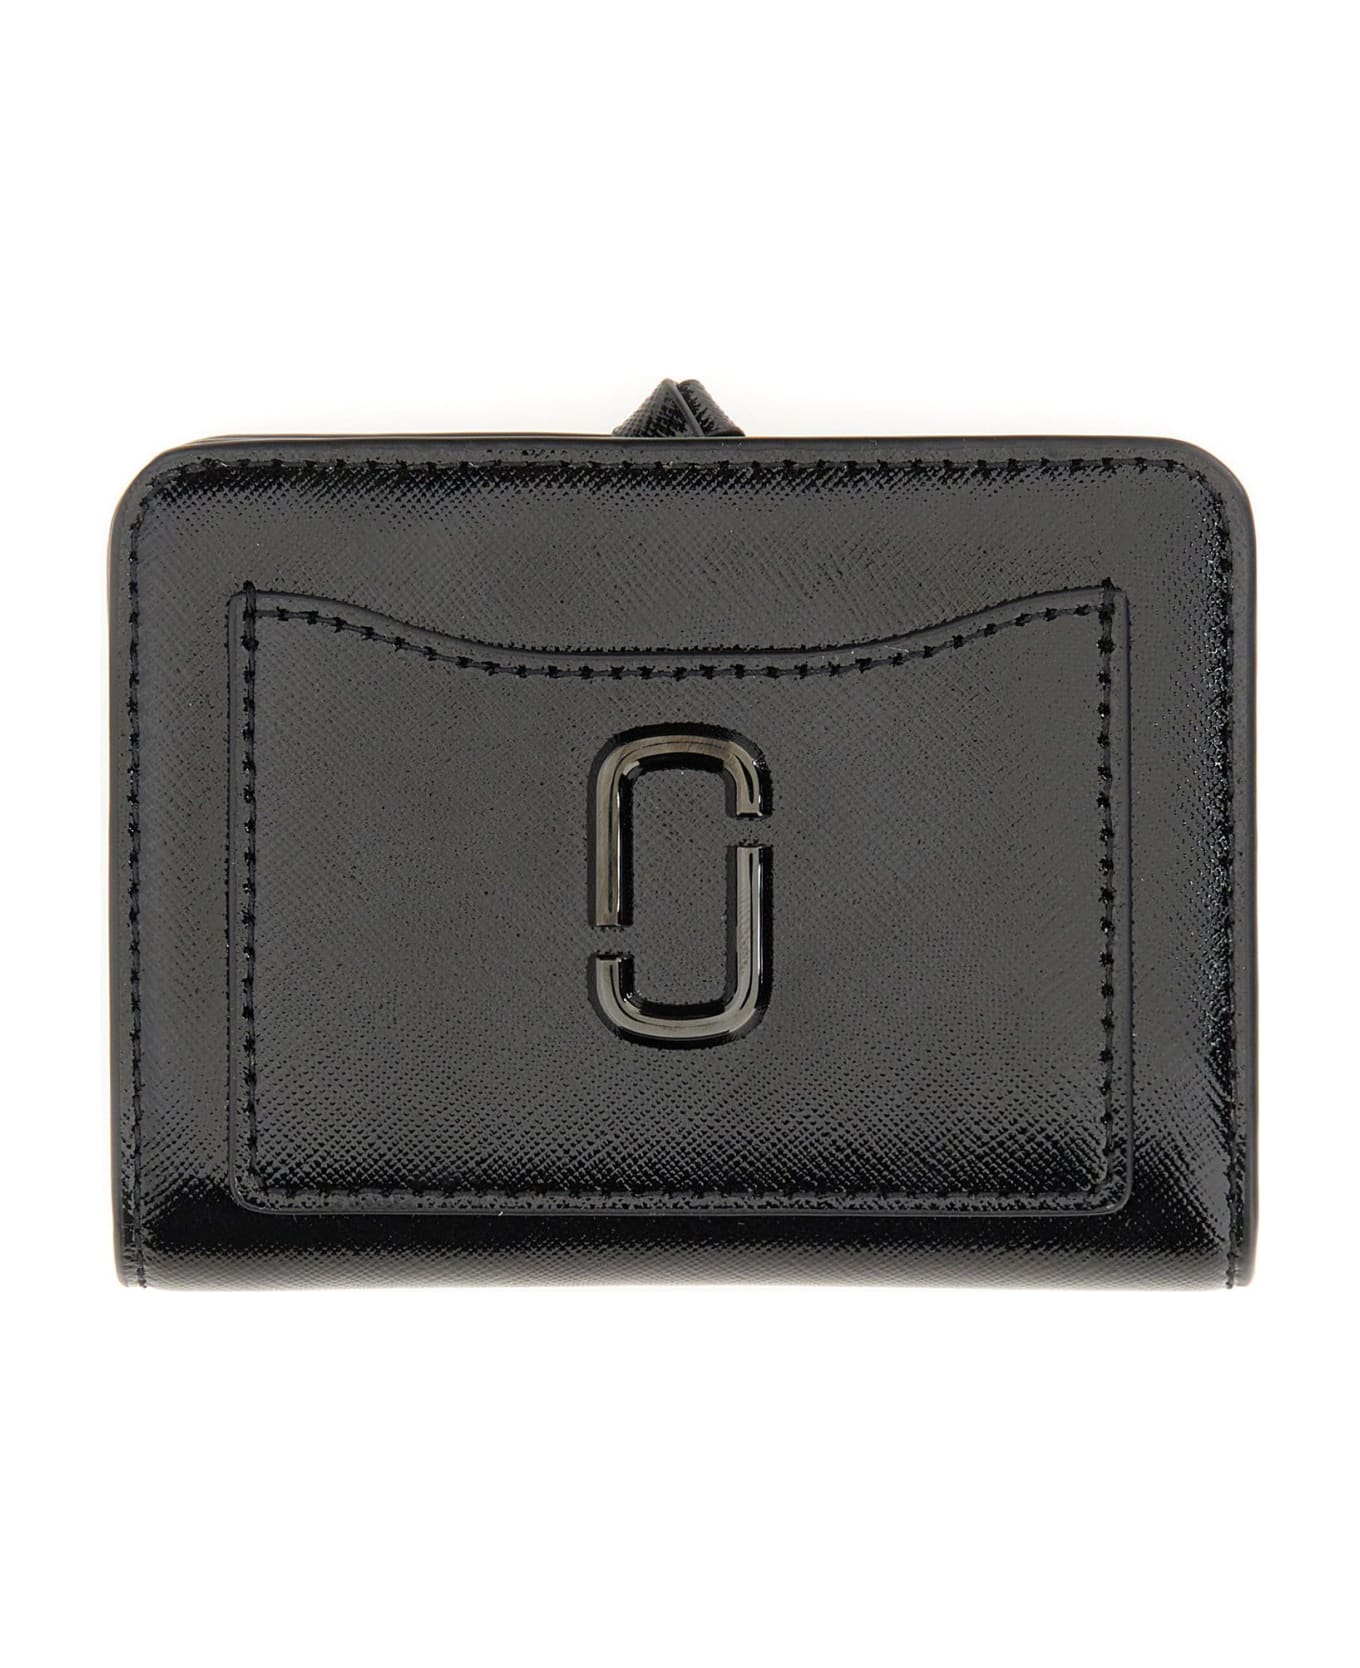 Marc Jacobs The Mini Compact Wallet In Black Leather - BLACK